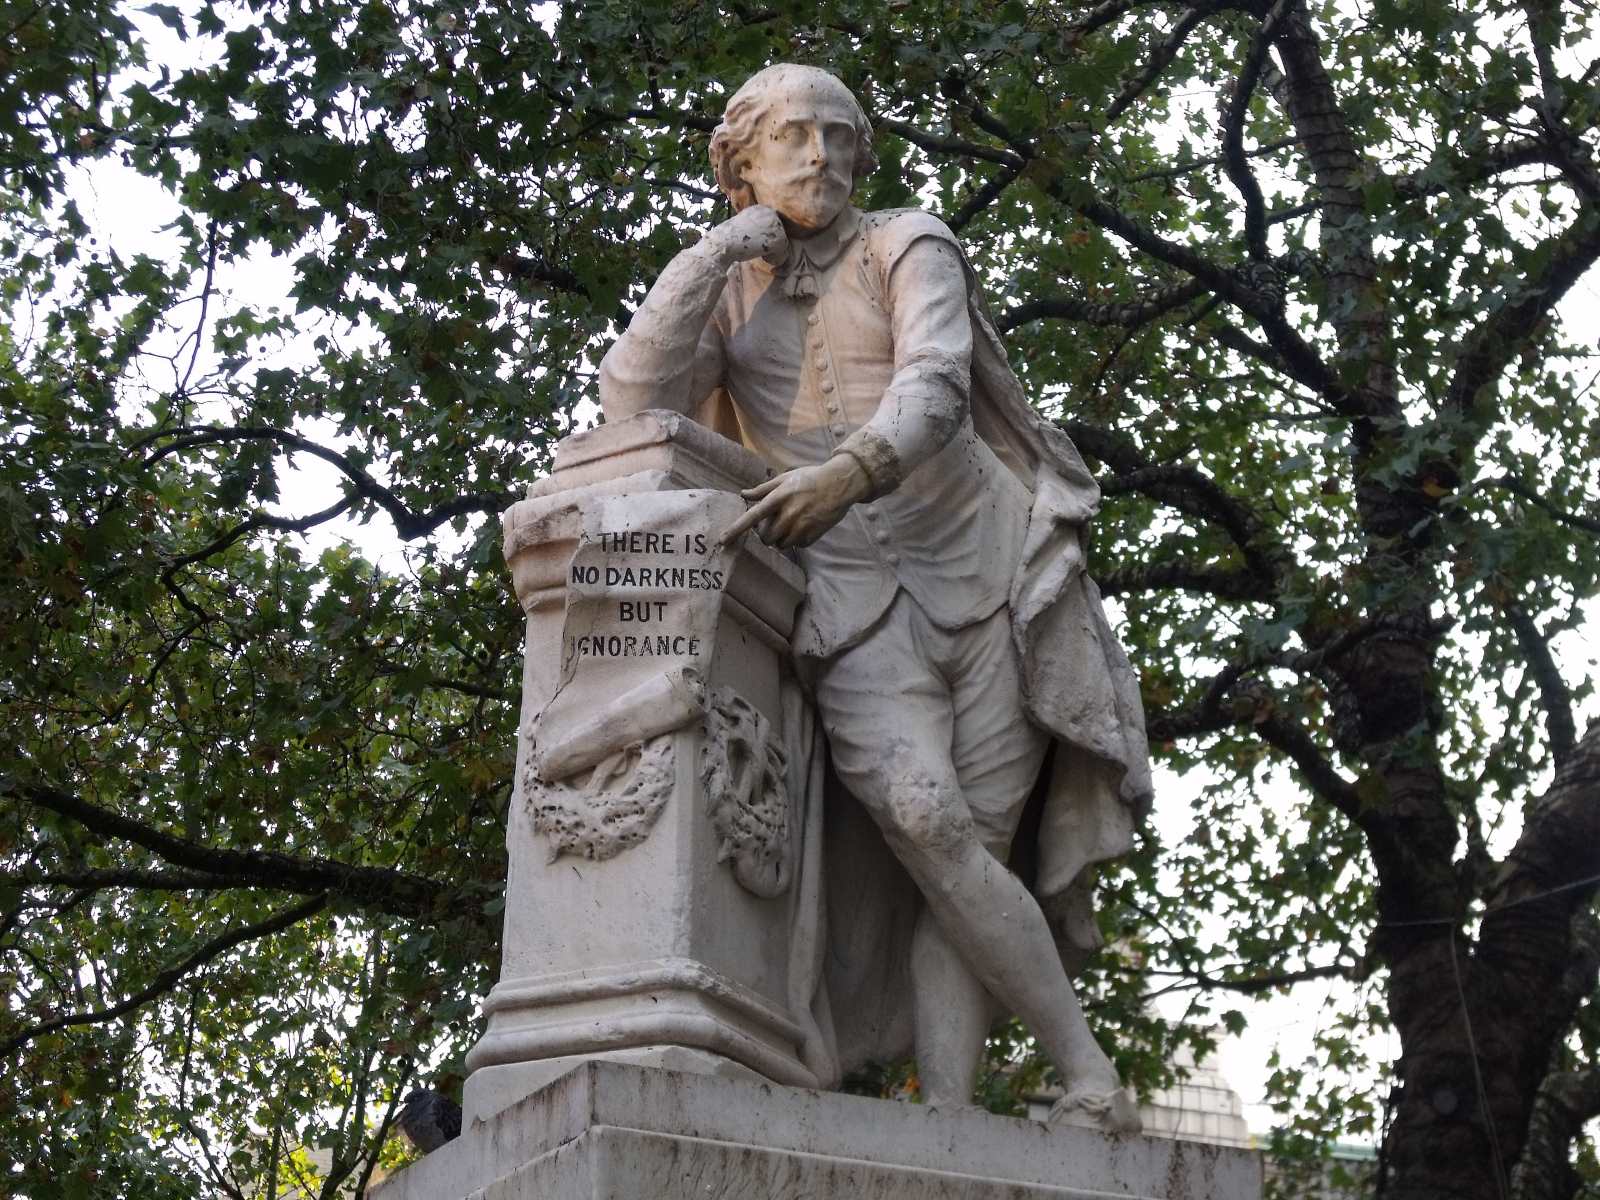 14-astonishing-facts-about-the-william-shakespeare-statue